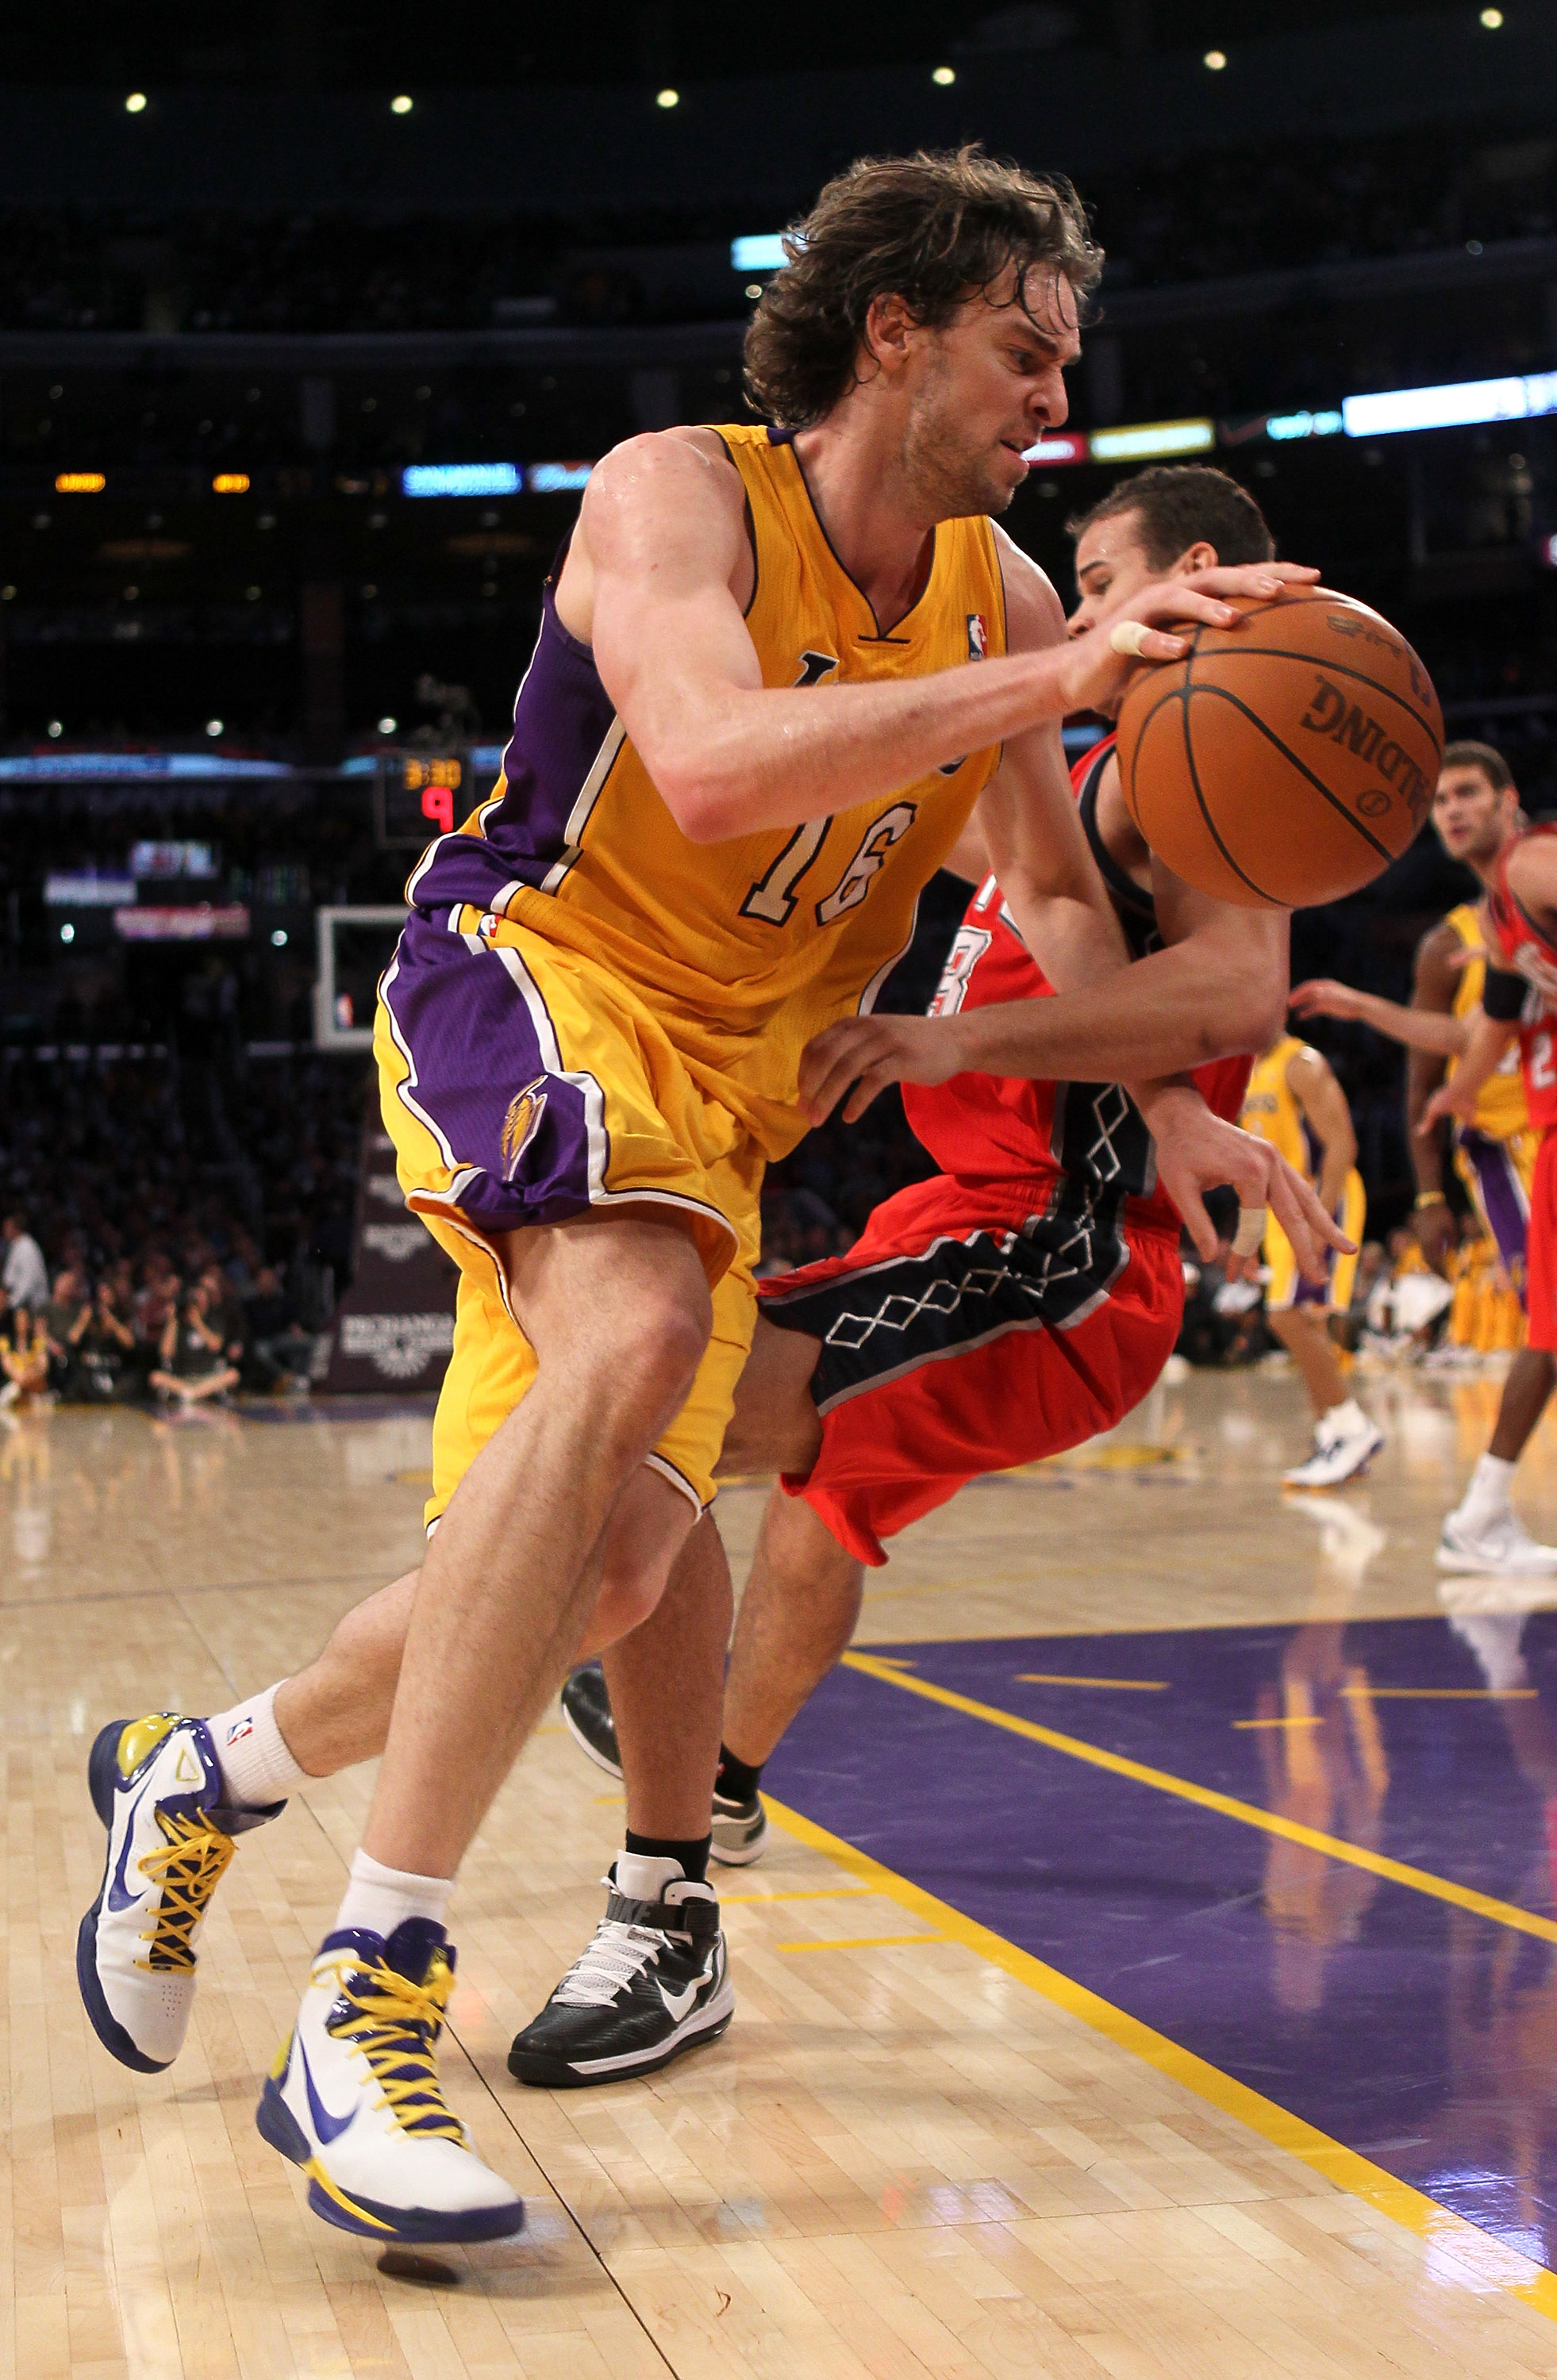 LOS ANGELES, CA - JANUARY 14:  Pau Gasol #16 of the Los Angeles Lakers shoots drives past Kris Humphries #43 of the New Jersey Nets at Staples Center on January 14, 2011 in Los Angeles, California. The Lakers won 100-88.  NOTE TO USER: User expressly ackn